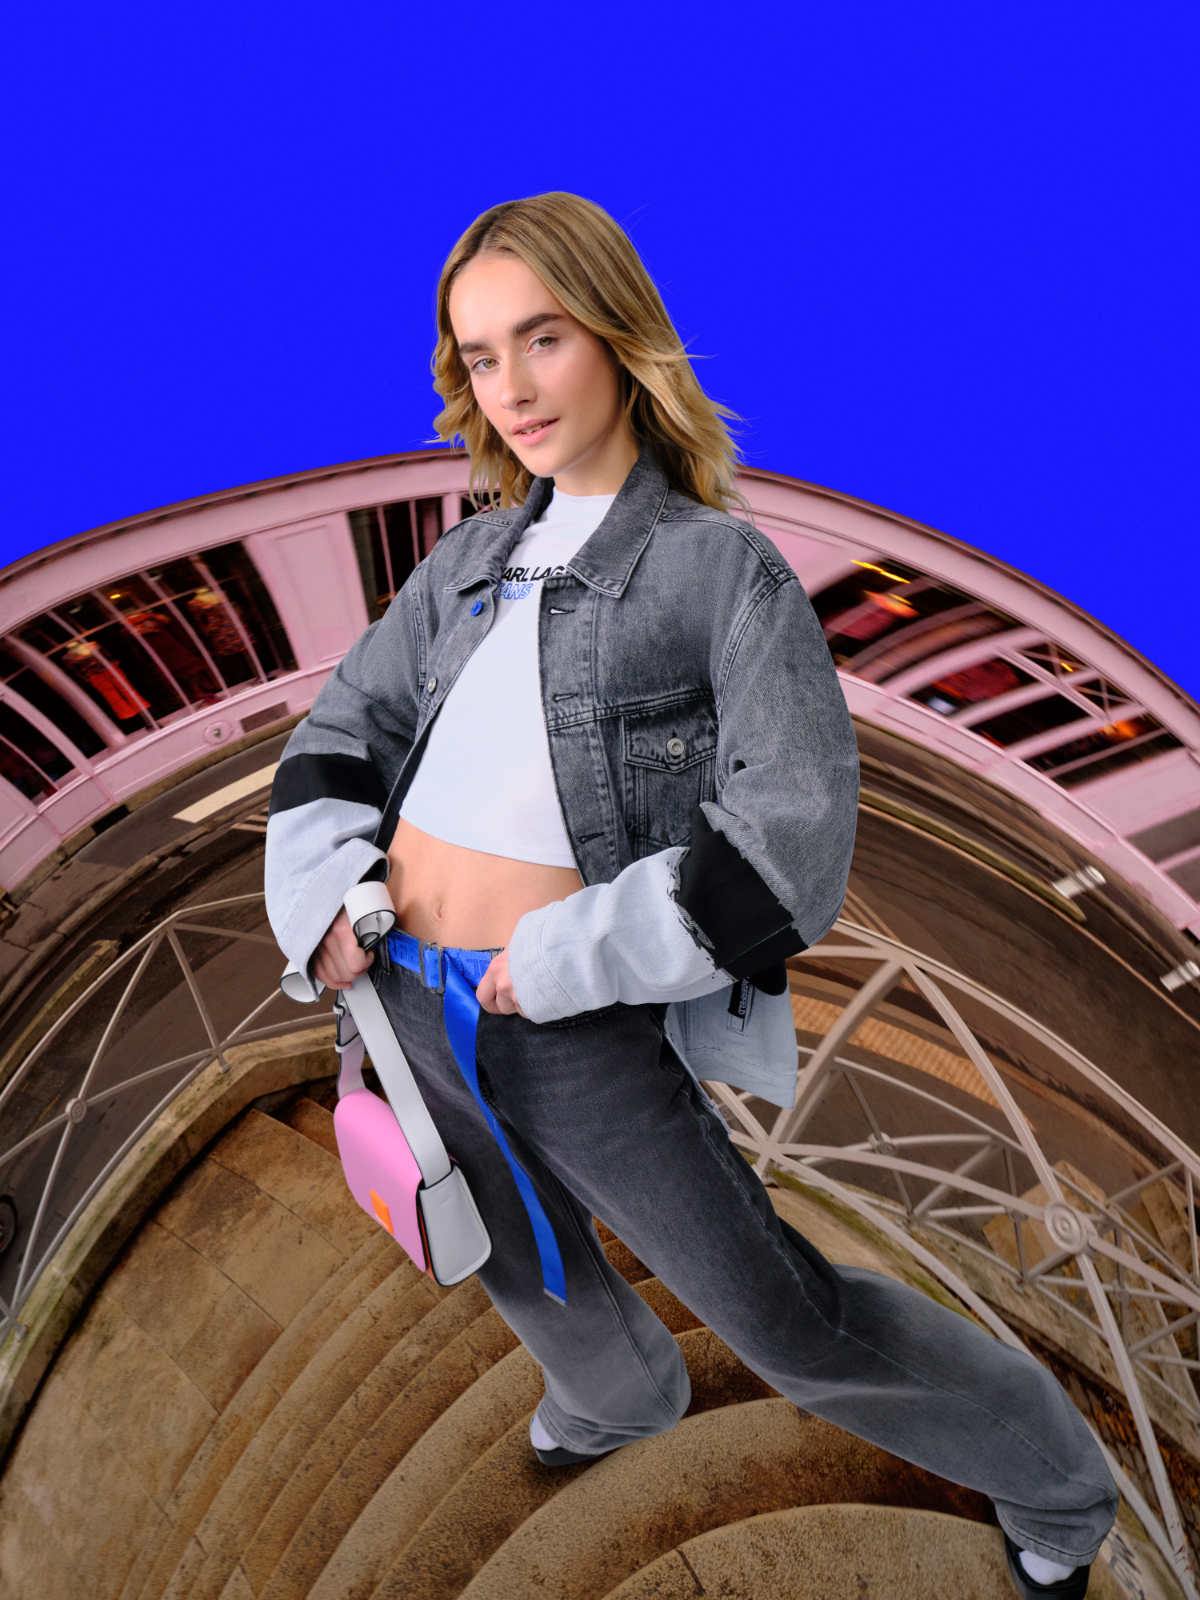 Karl Lagerfeld launches new jeans brand for Gen Z shoppers